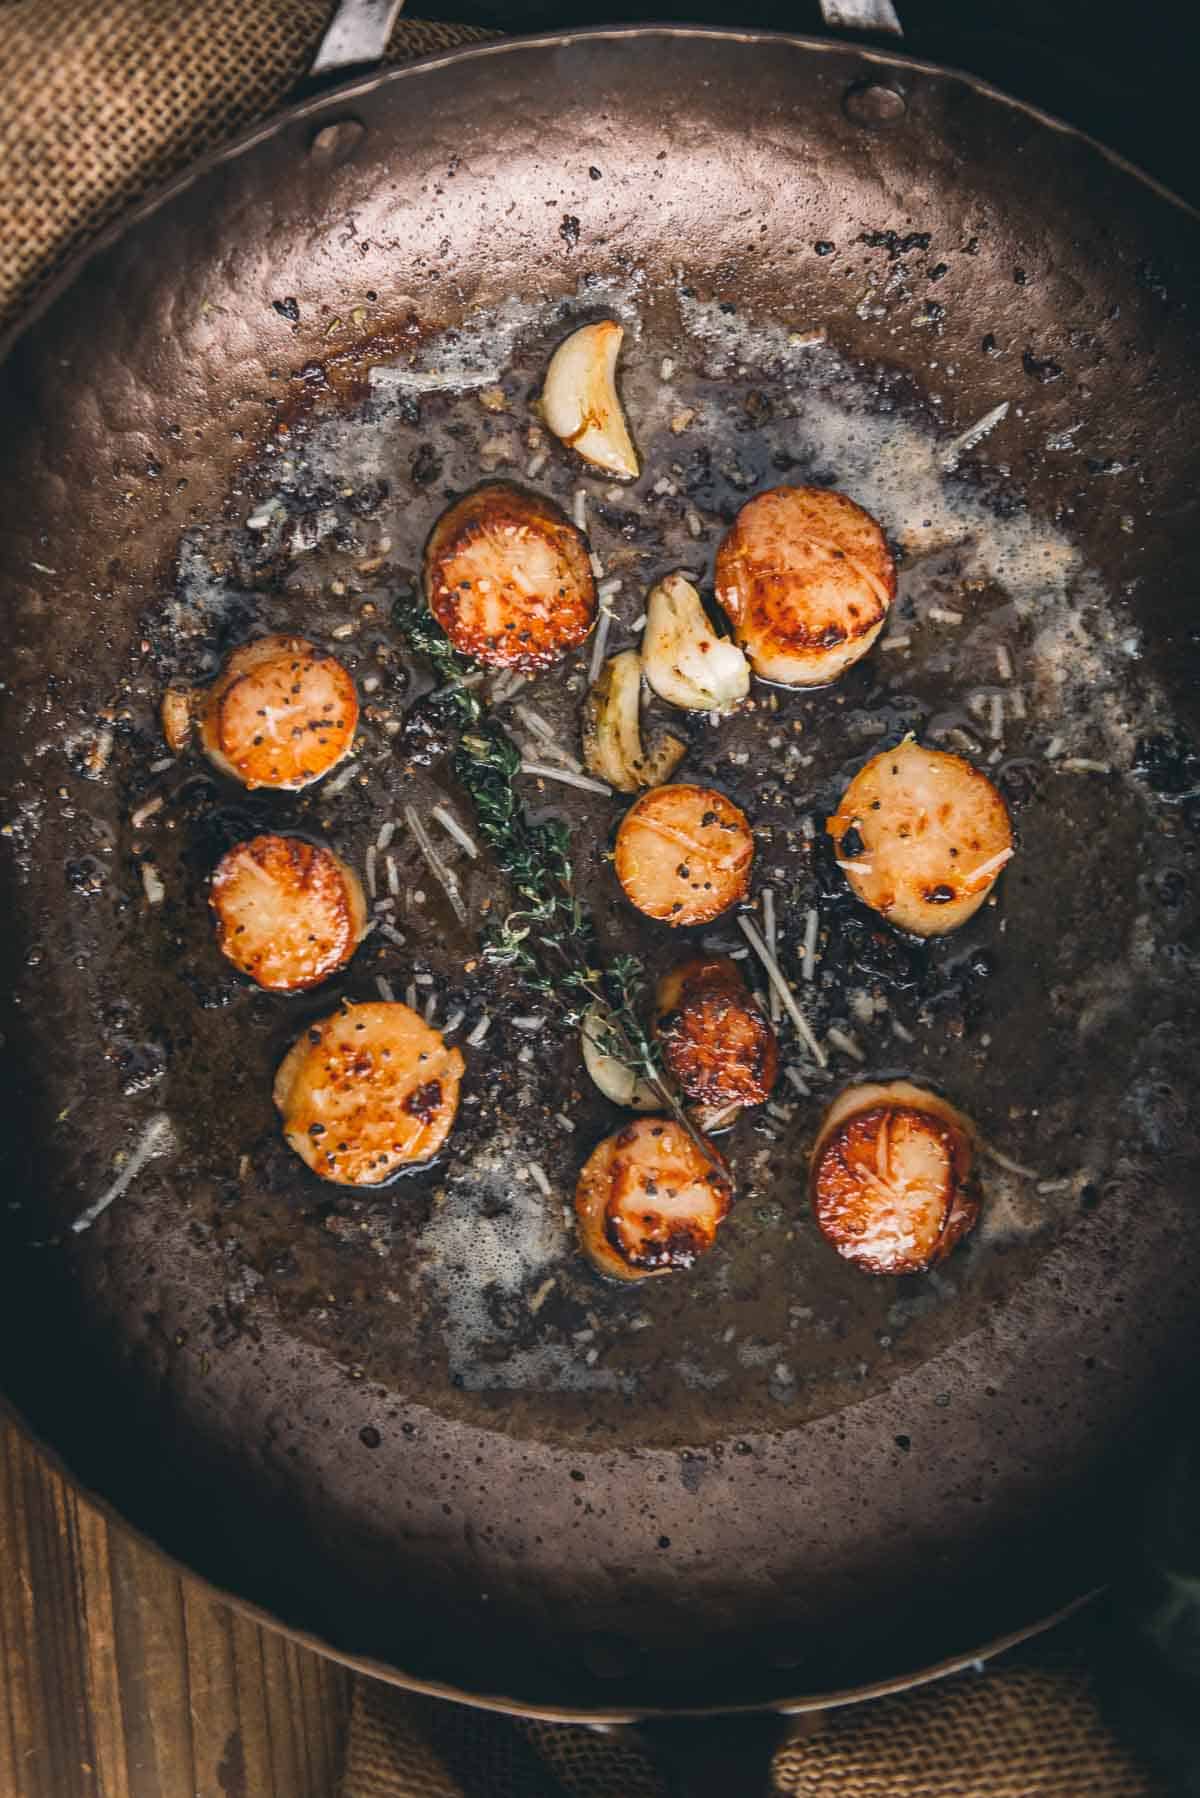 Scallops in a frying pan on a wooden table.